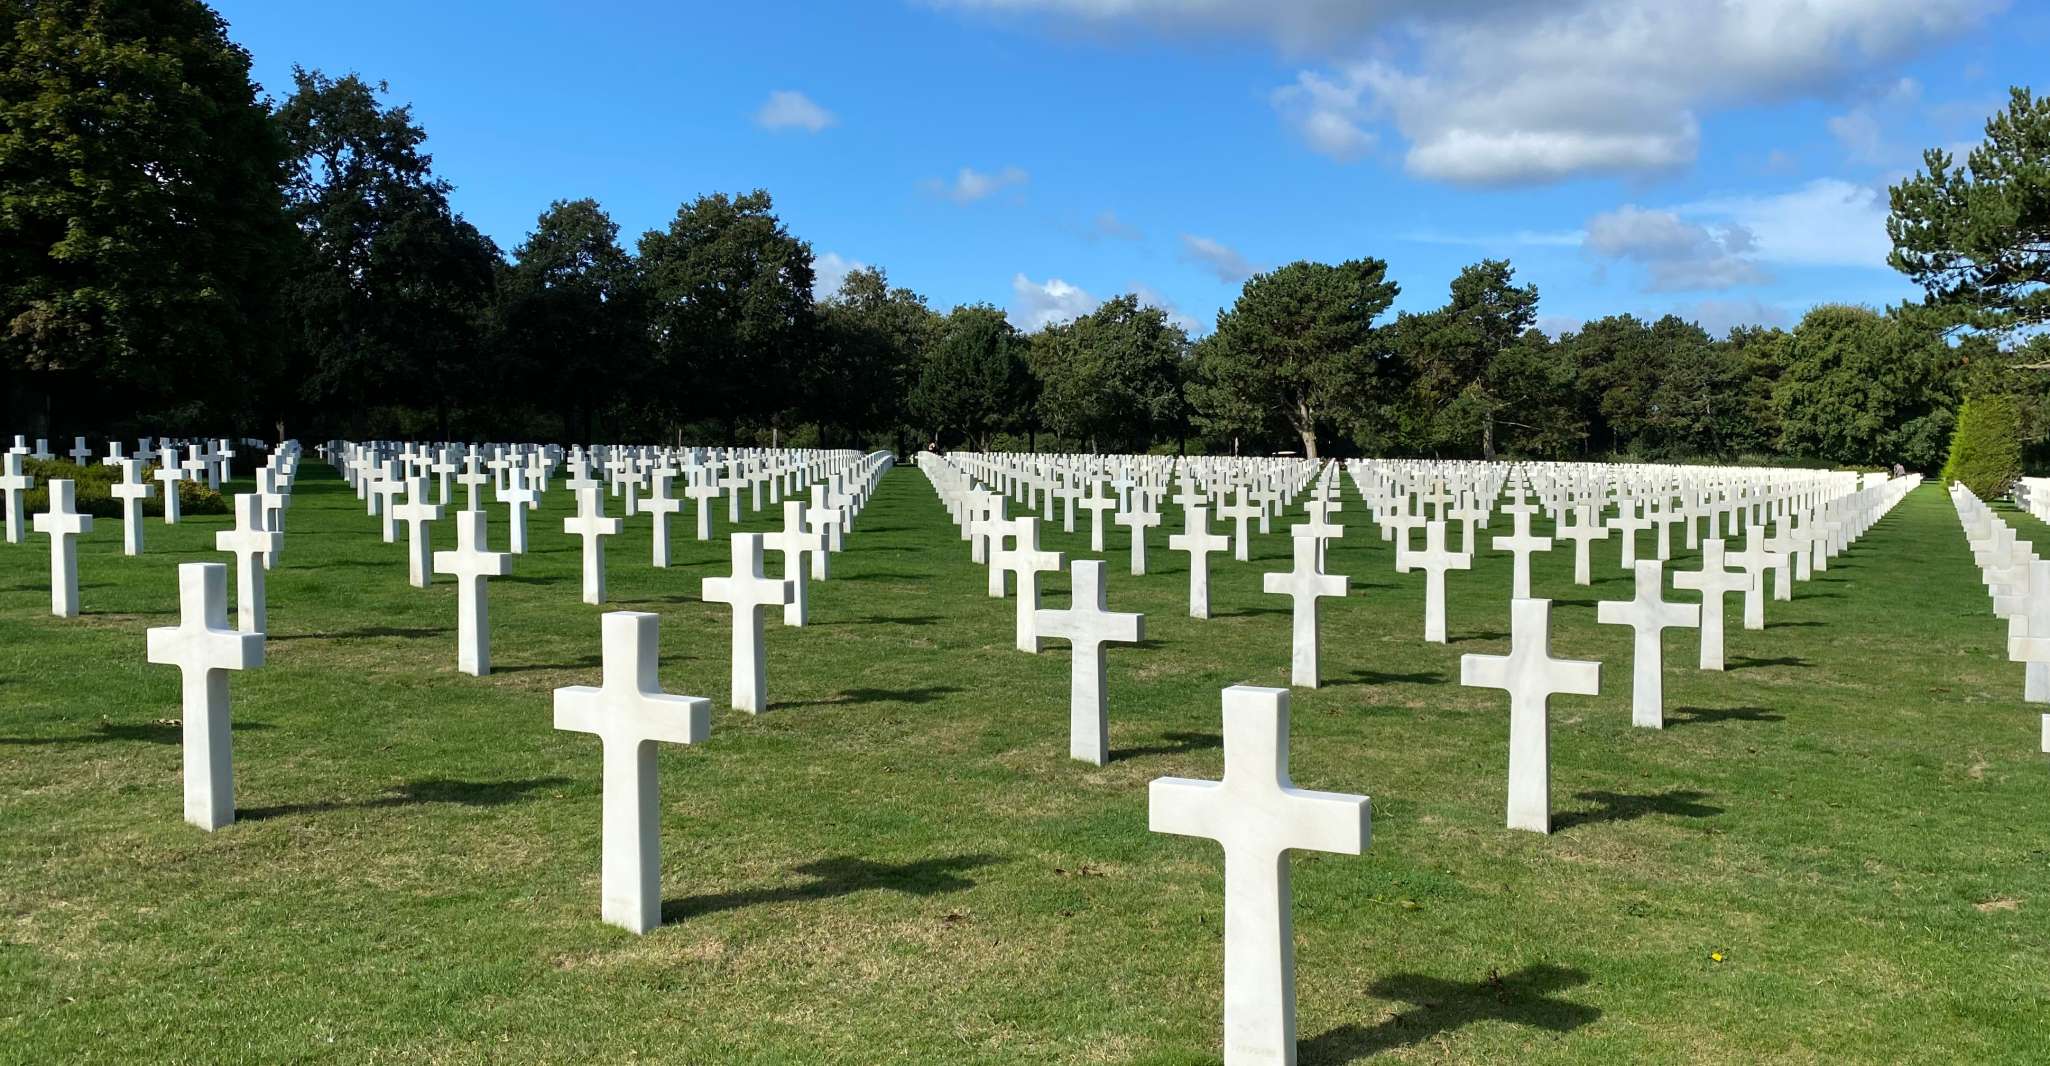 D-Day Normandy Beaches Day Trip From Paris - Housity